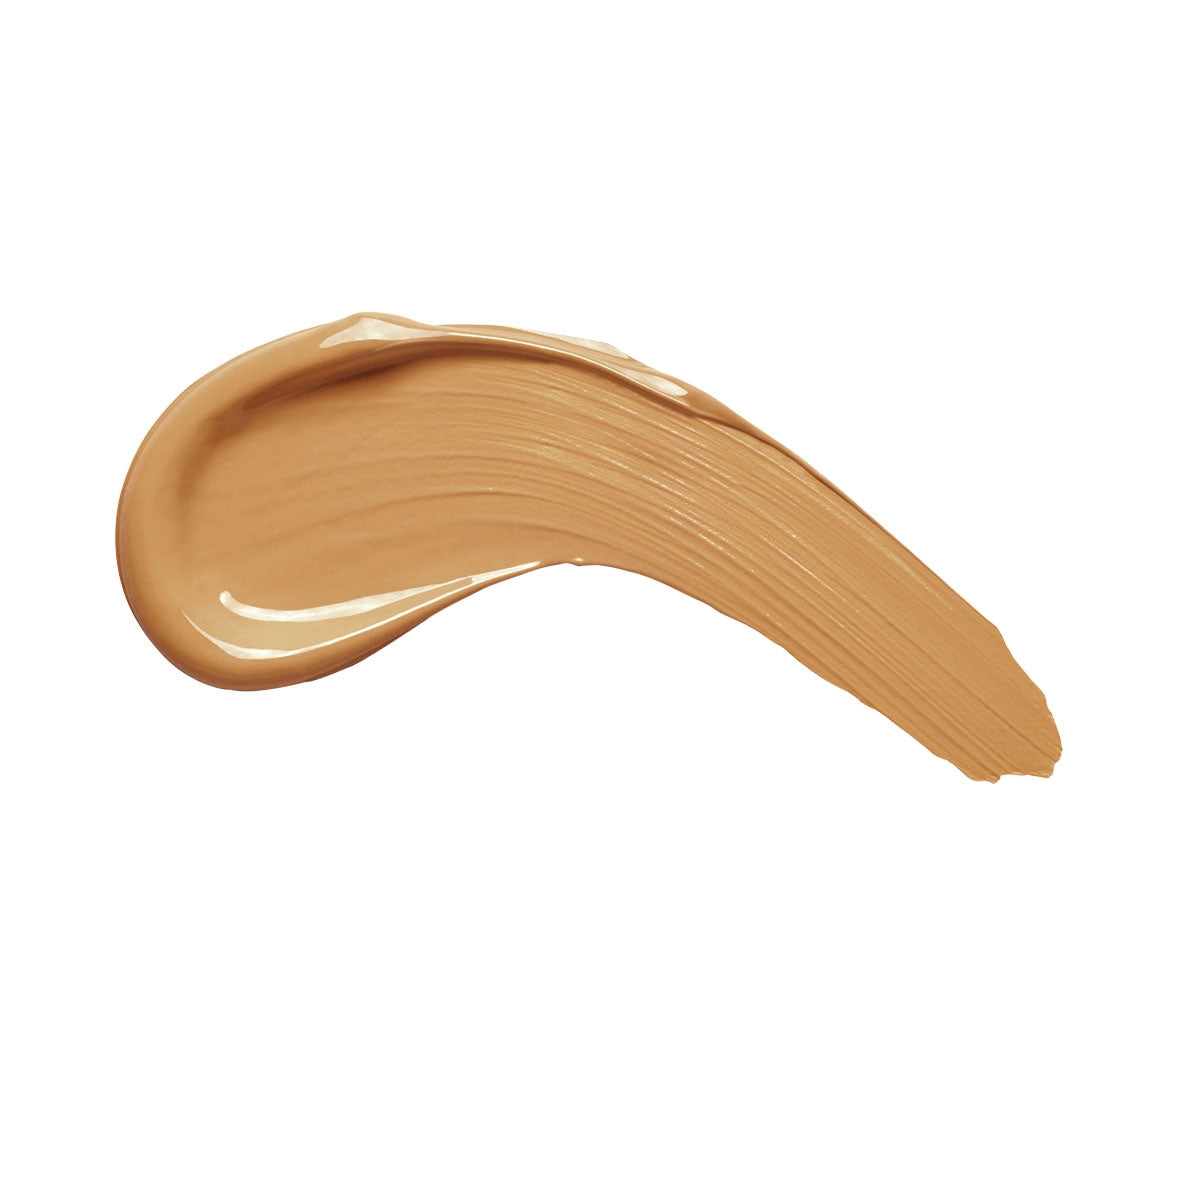 Beyond Full Coverage Foundation